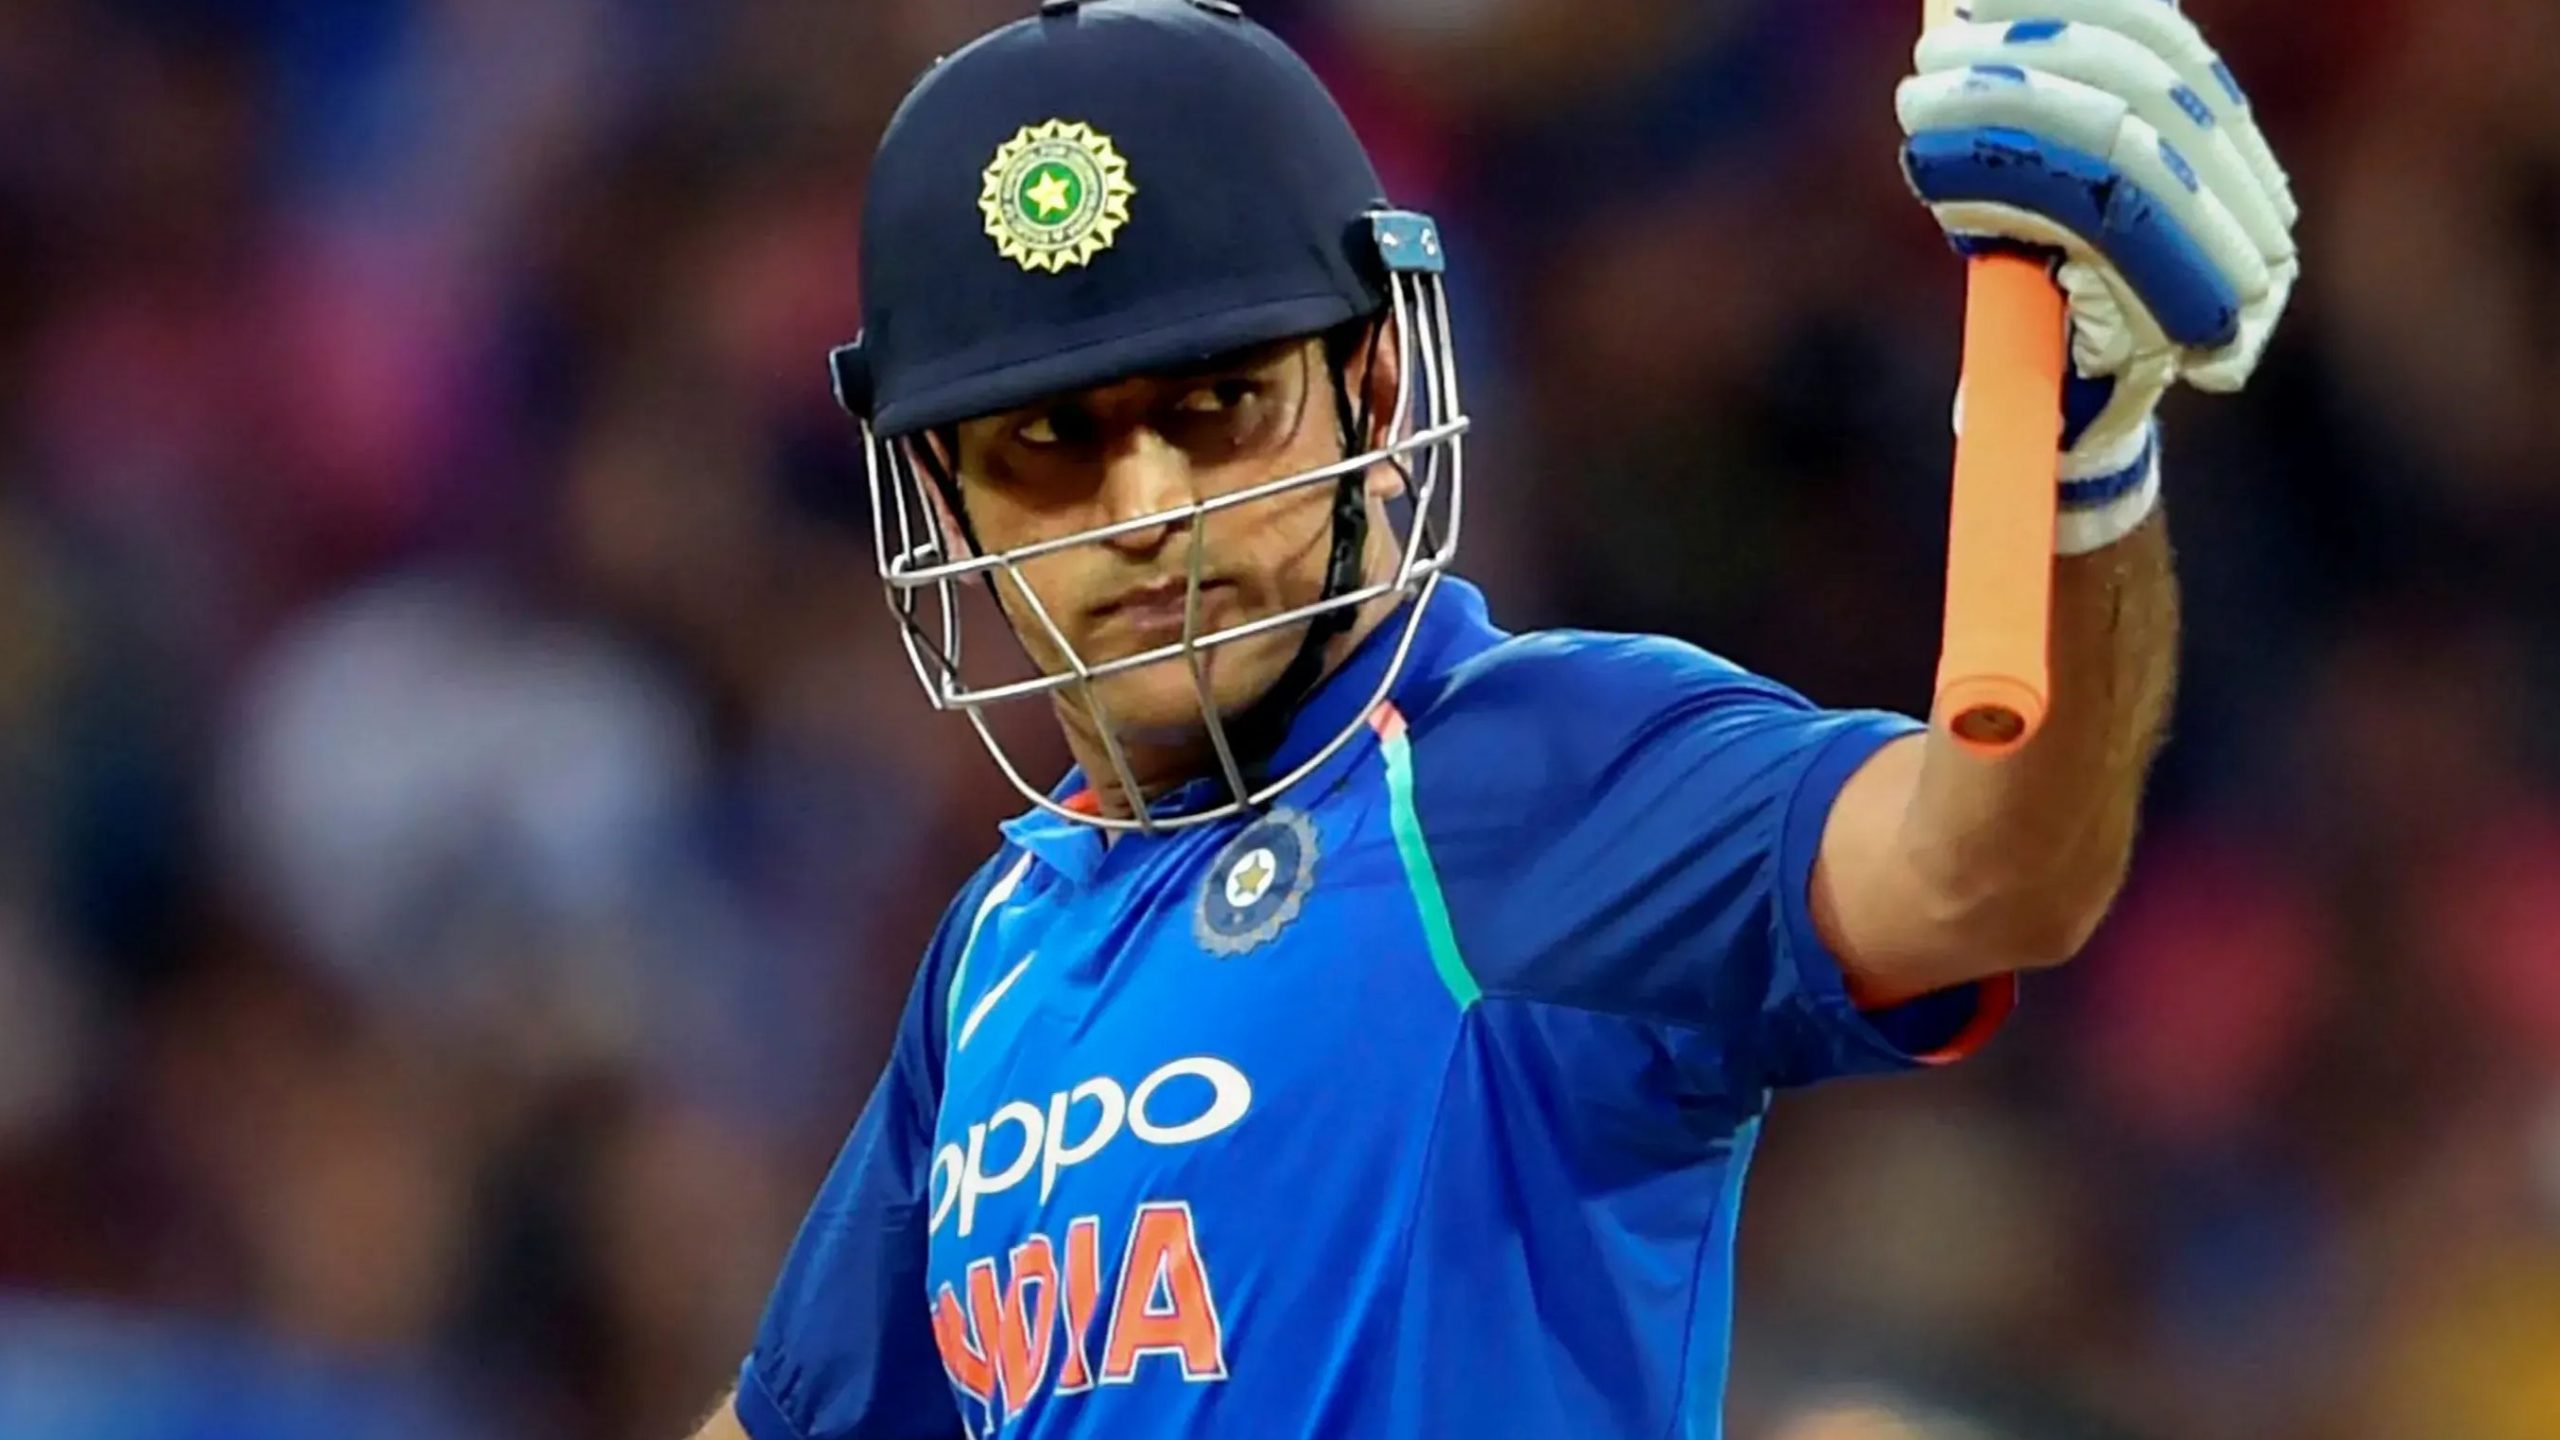 ‘All the best for 2nd innings’: Cricket fraternity, politicians react to MS Dhoni’s retirement